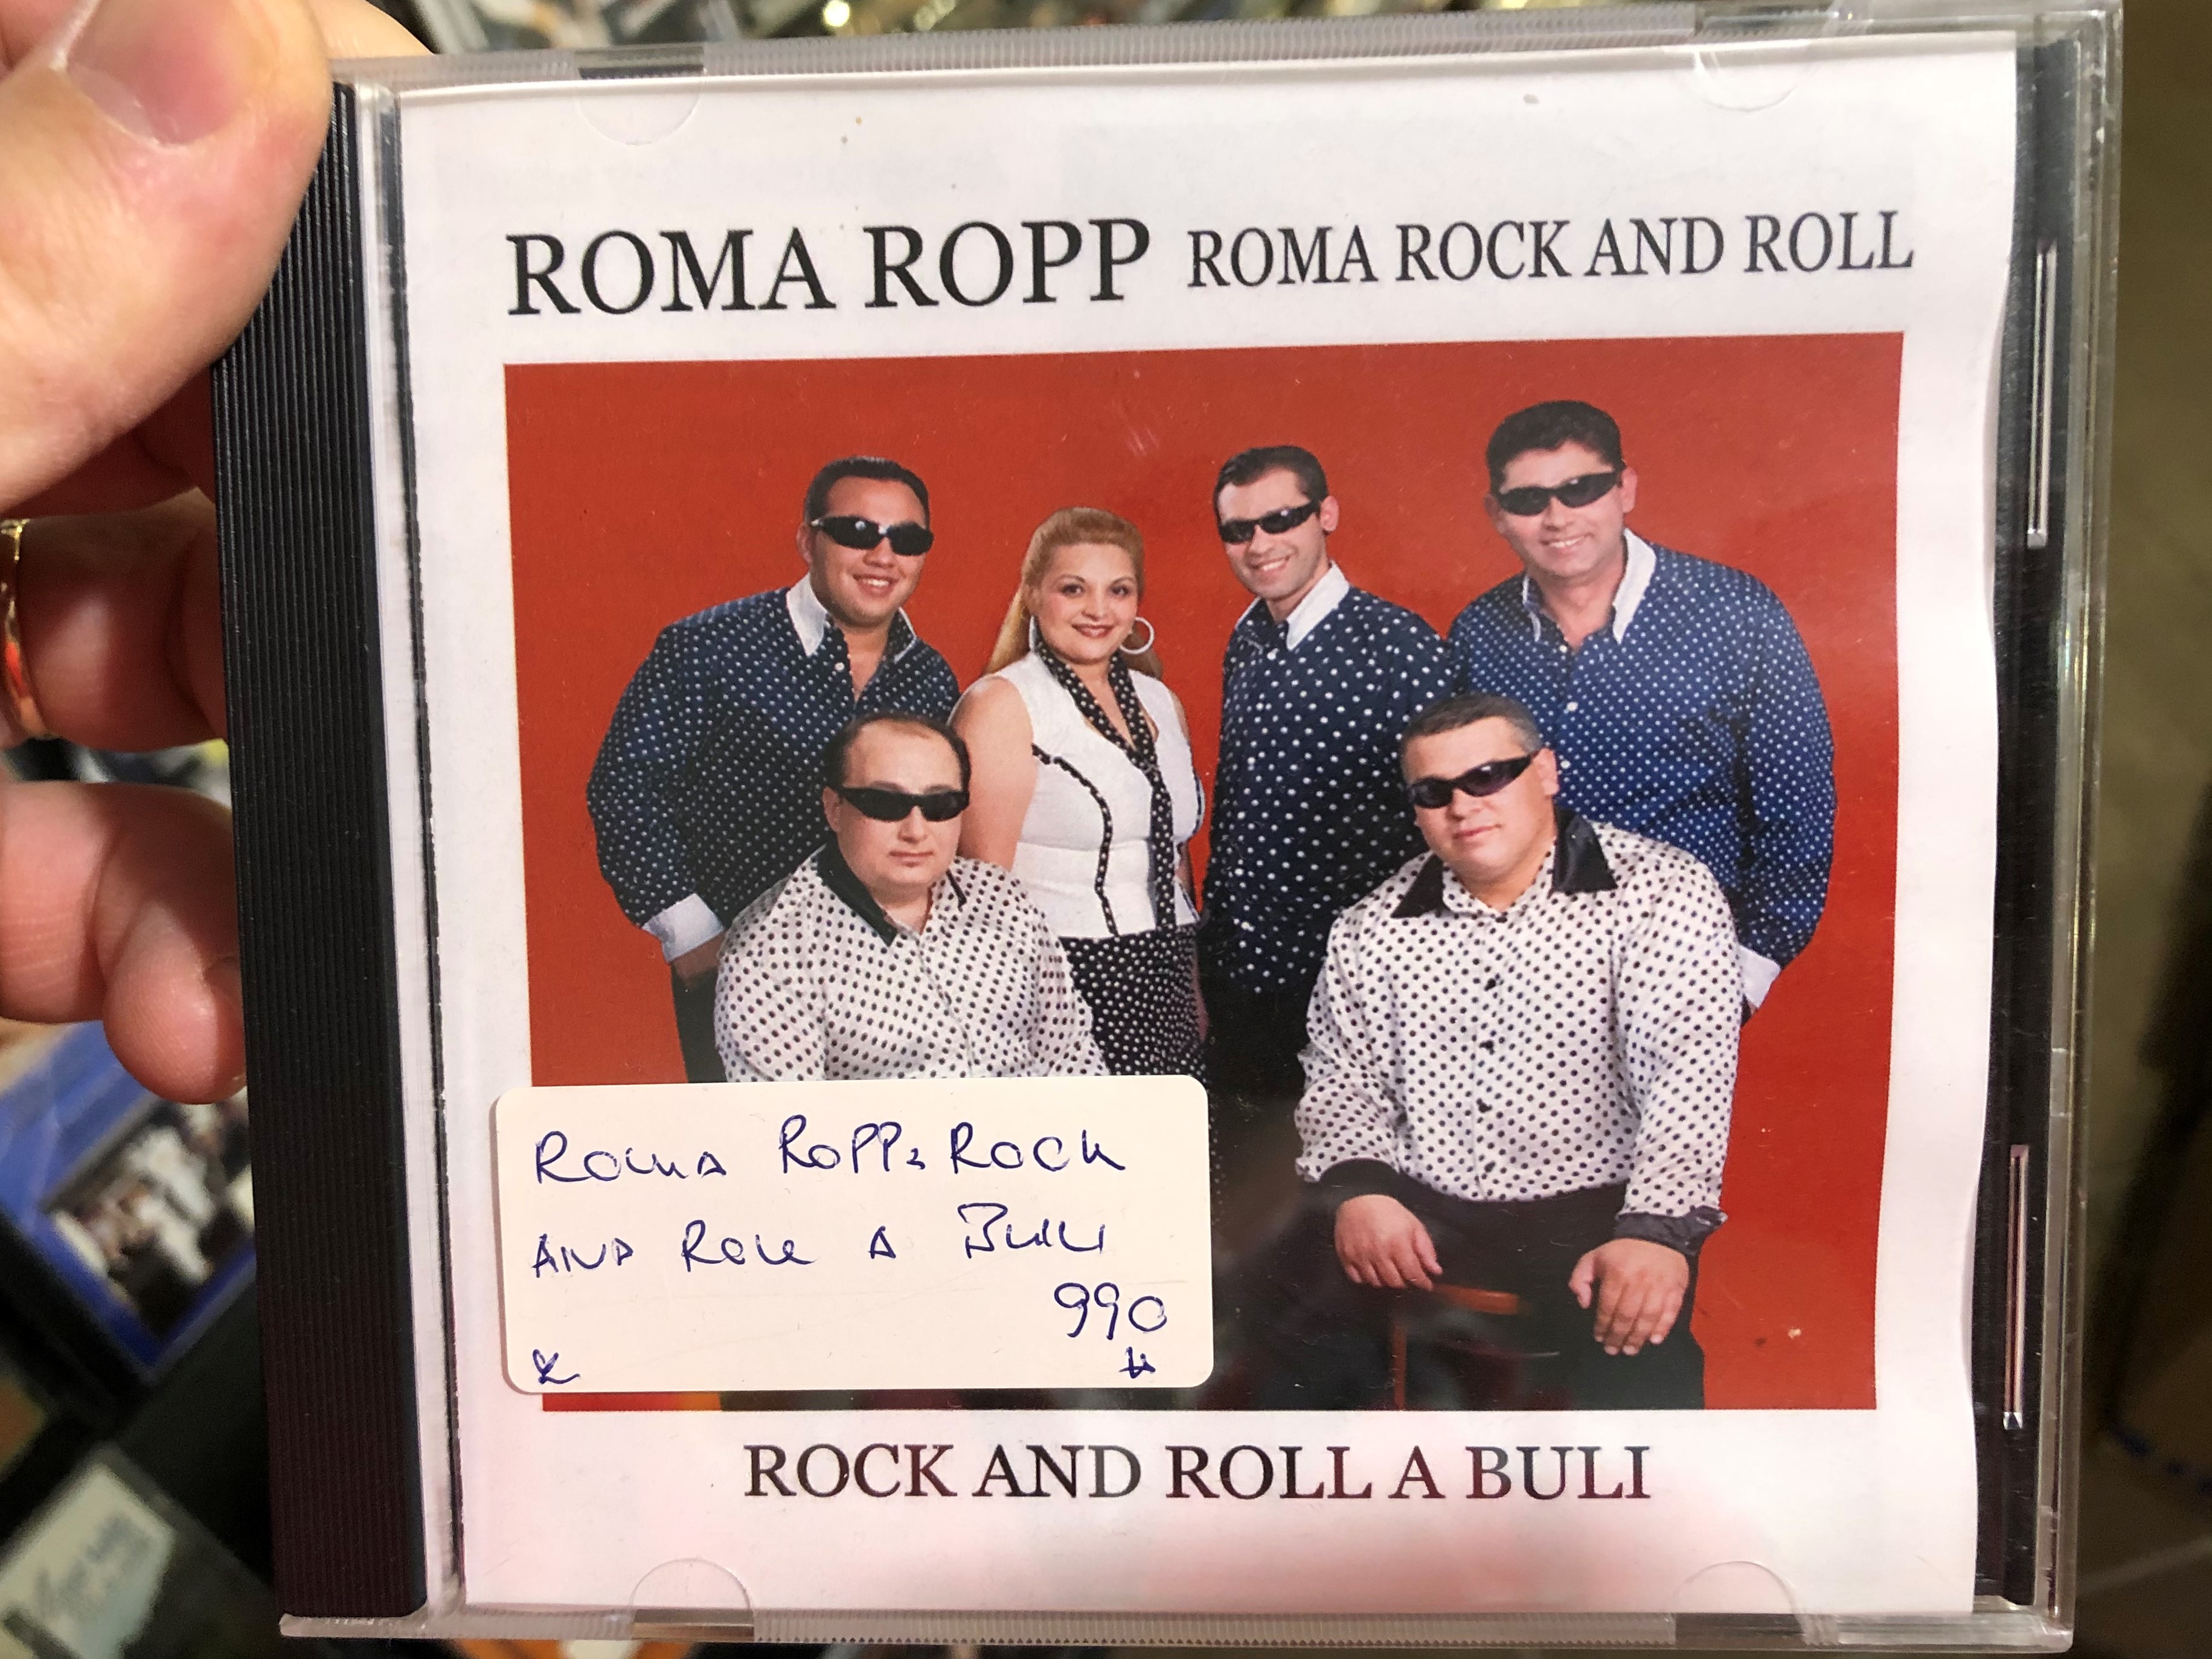 roma-ropp-roma-rock-and-roll-rock-and-roll-a-buli-mtp-audio-cd-5999884540007-1-.jpg